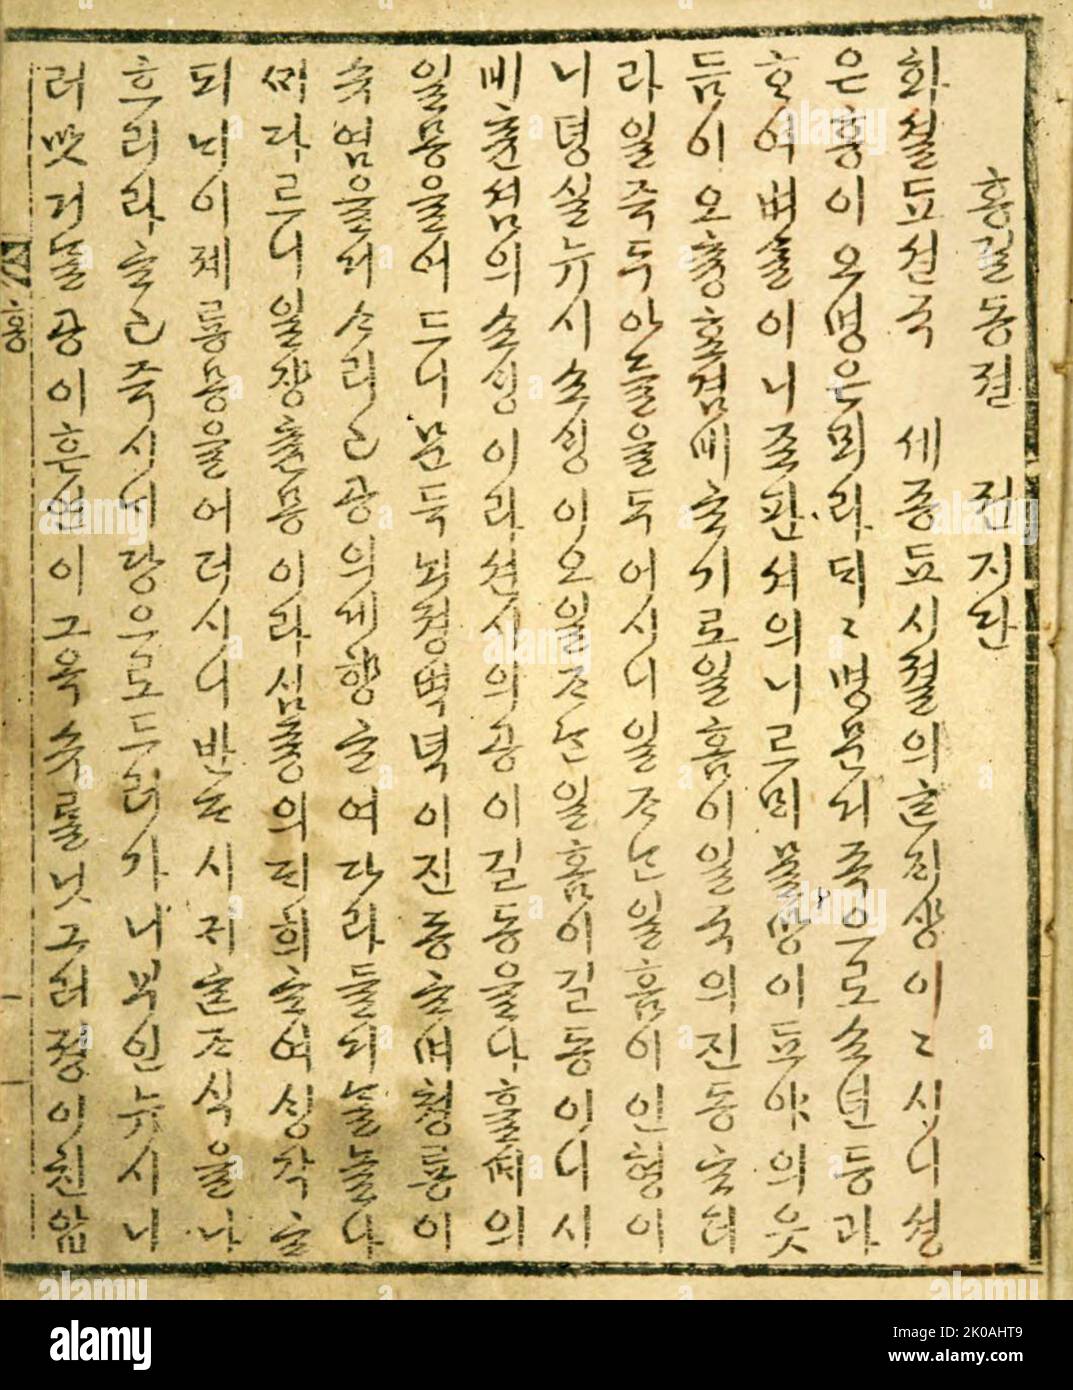 Tale of Hong Gildong is one of the first novels written in Hangul, the Korean alphabet, in the middle of the Joseon Dynasty. The novel is by Heo Gyun (Ho Kyun, 1569-1618), whose revolutionary thinking is reflected in the story's emphasis on breaking down differences in status and reforming corrupt politics. The main character of the novel, Hong Gildong, became a bandit leader and organized a band of 'Robin Hoods,' who robbed the rich of their unjustly earned goods and distributed them to the poor Stock Photo